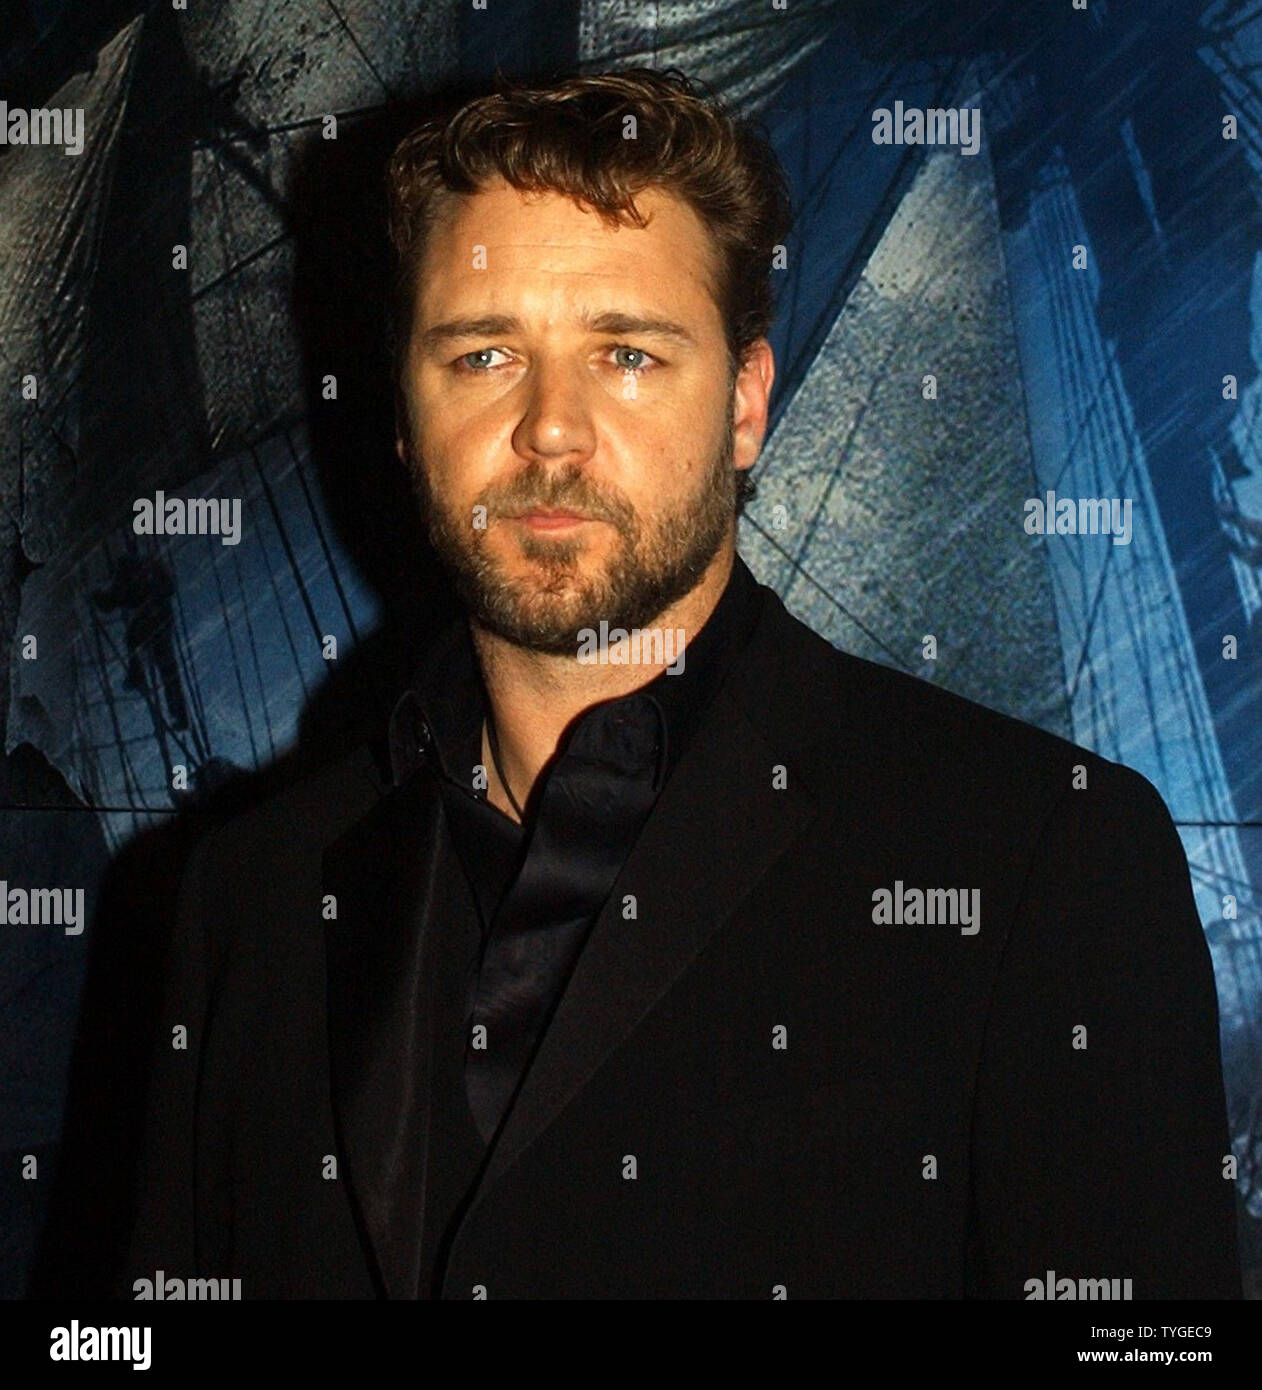 Actor Russell Crowe poses for the media at the Nov. 1, 2003 New York premiere of his new film "Master and Commander:The Far Side of the World."  (UPI/Ezio Petersen) Stock Photo